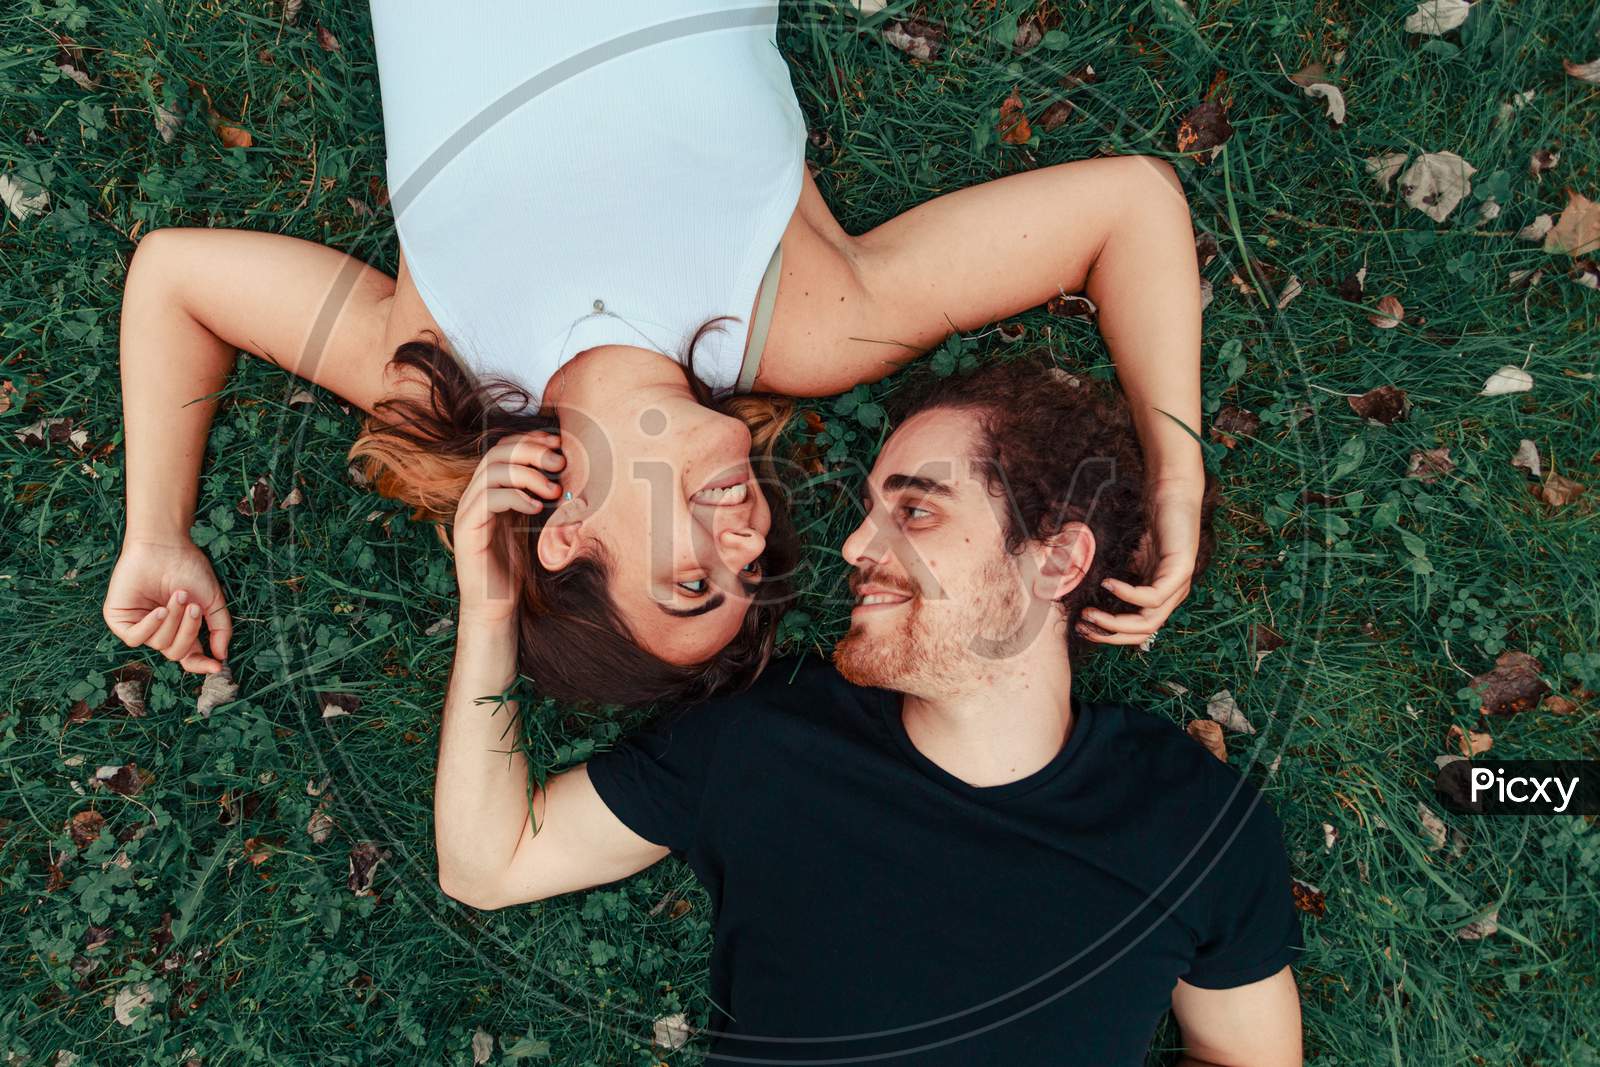 Young Couple Smiling Each Other While Lying On The Grass